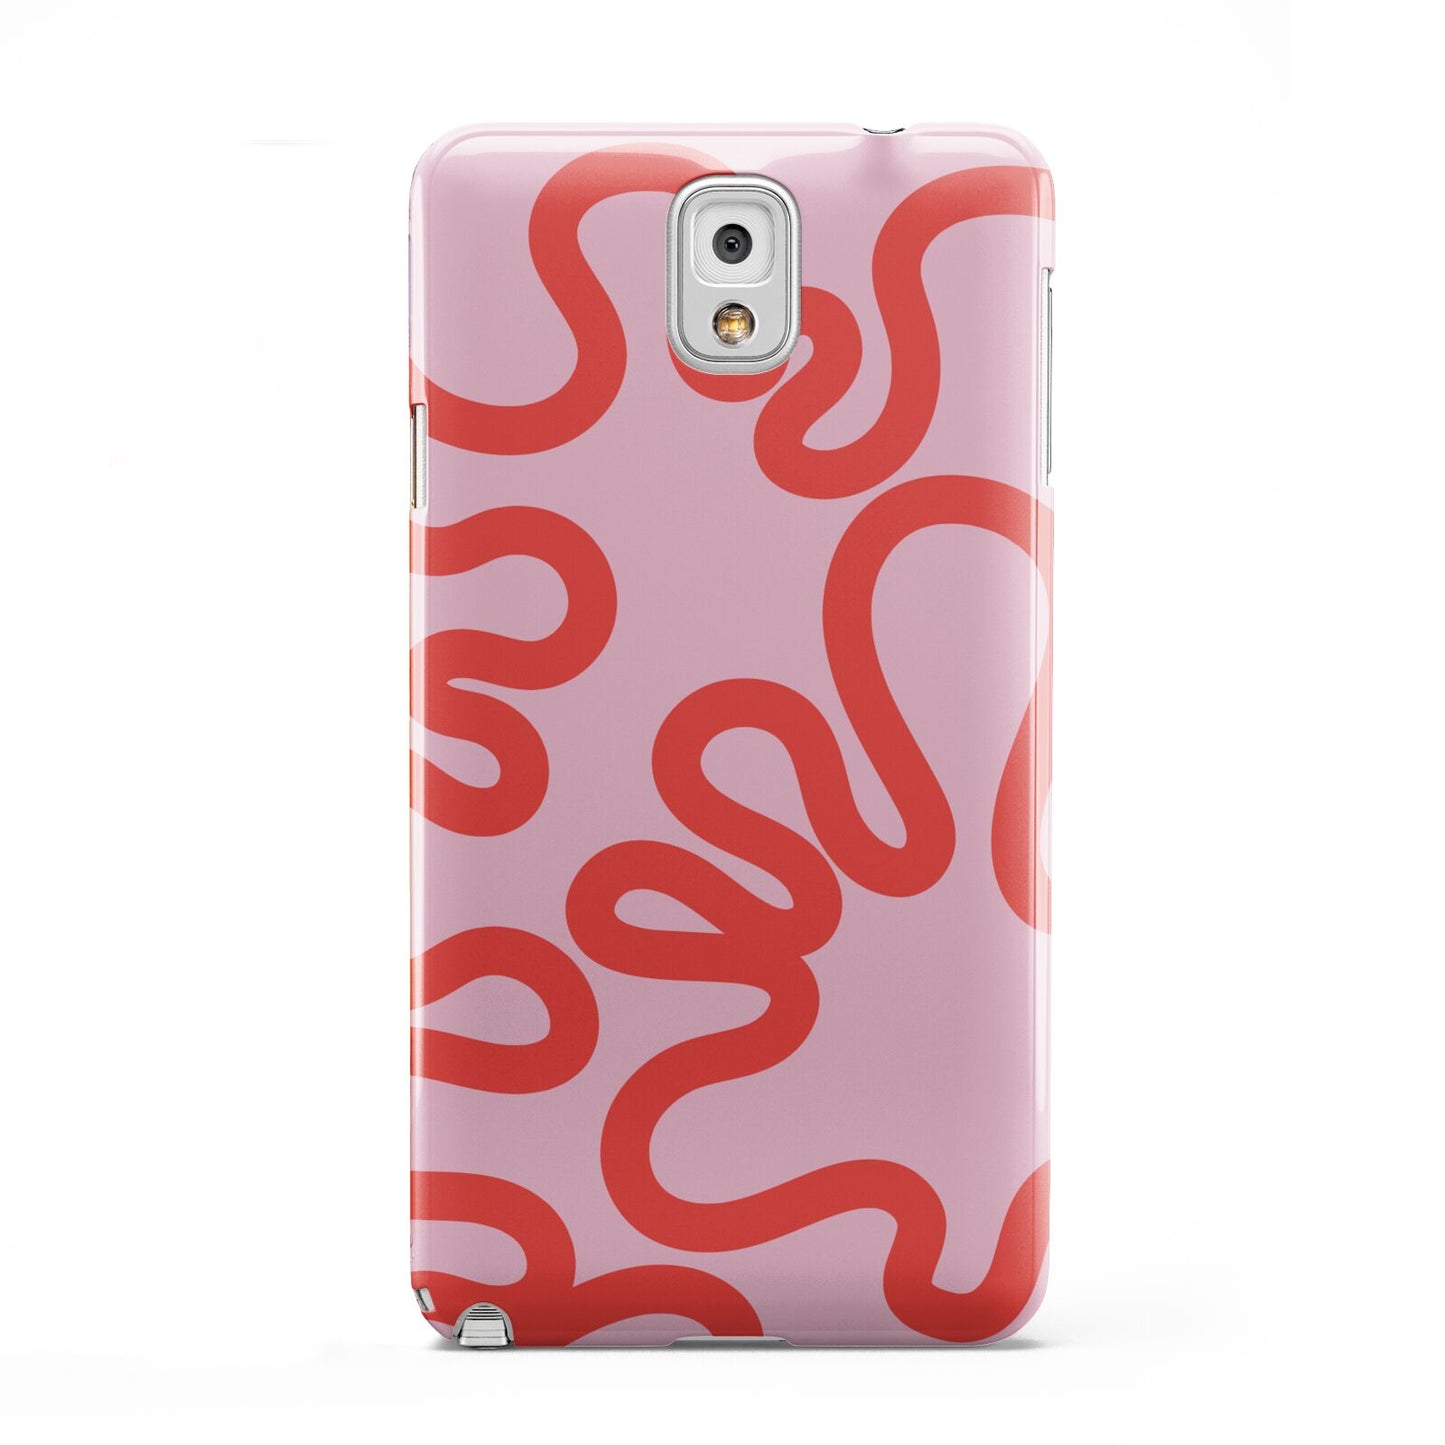 Squiggle Samsung Galaxy Note 3 Case